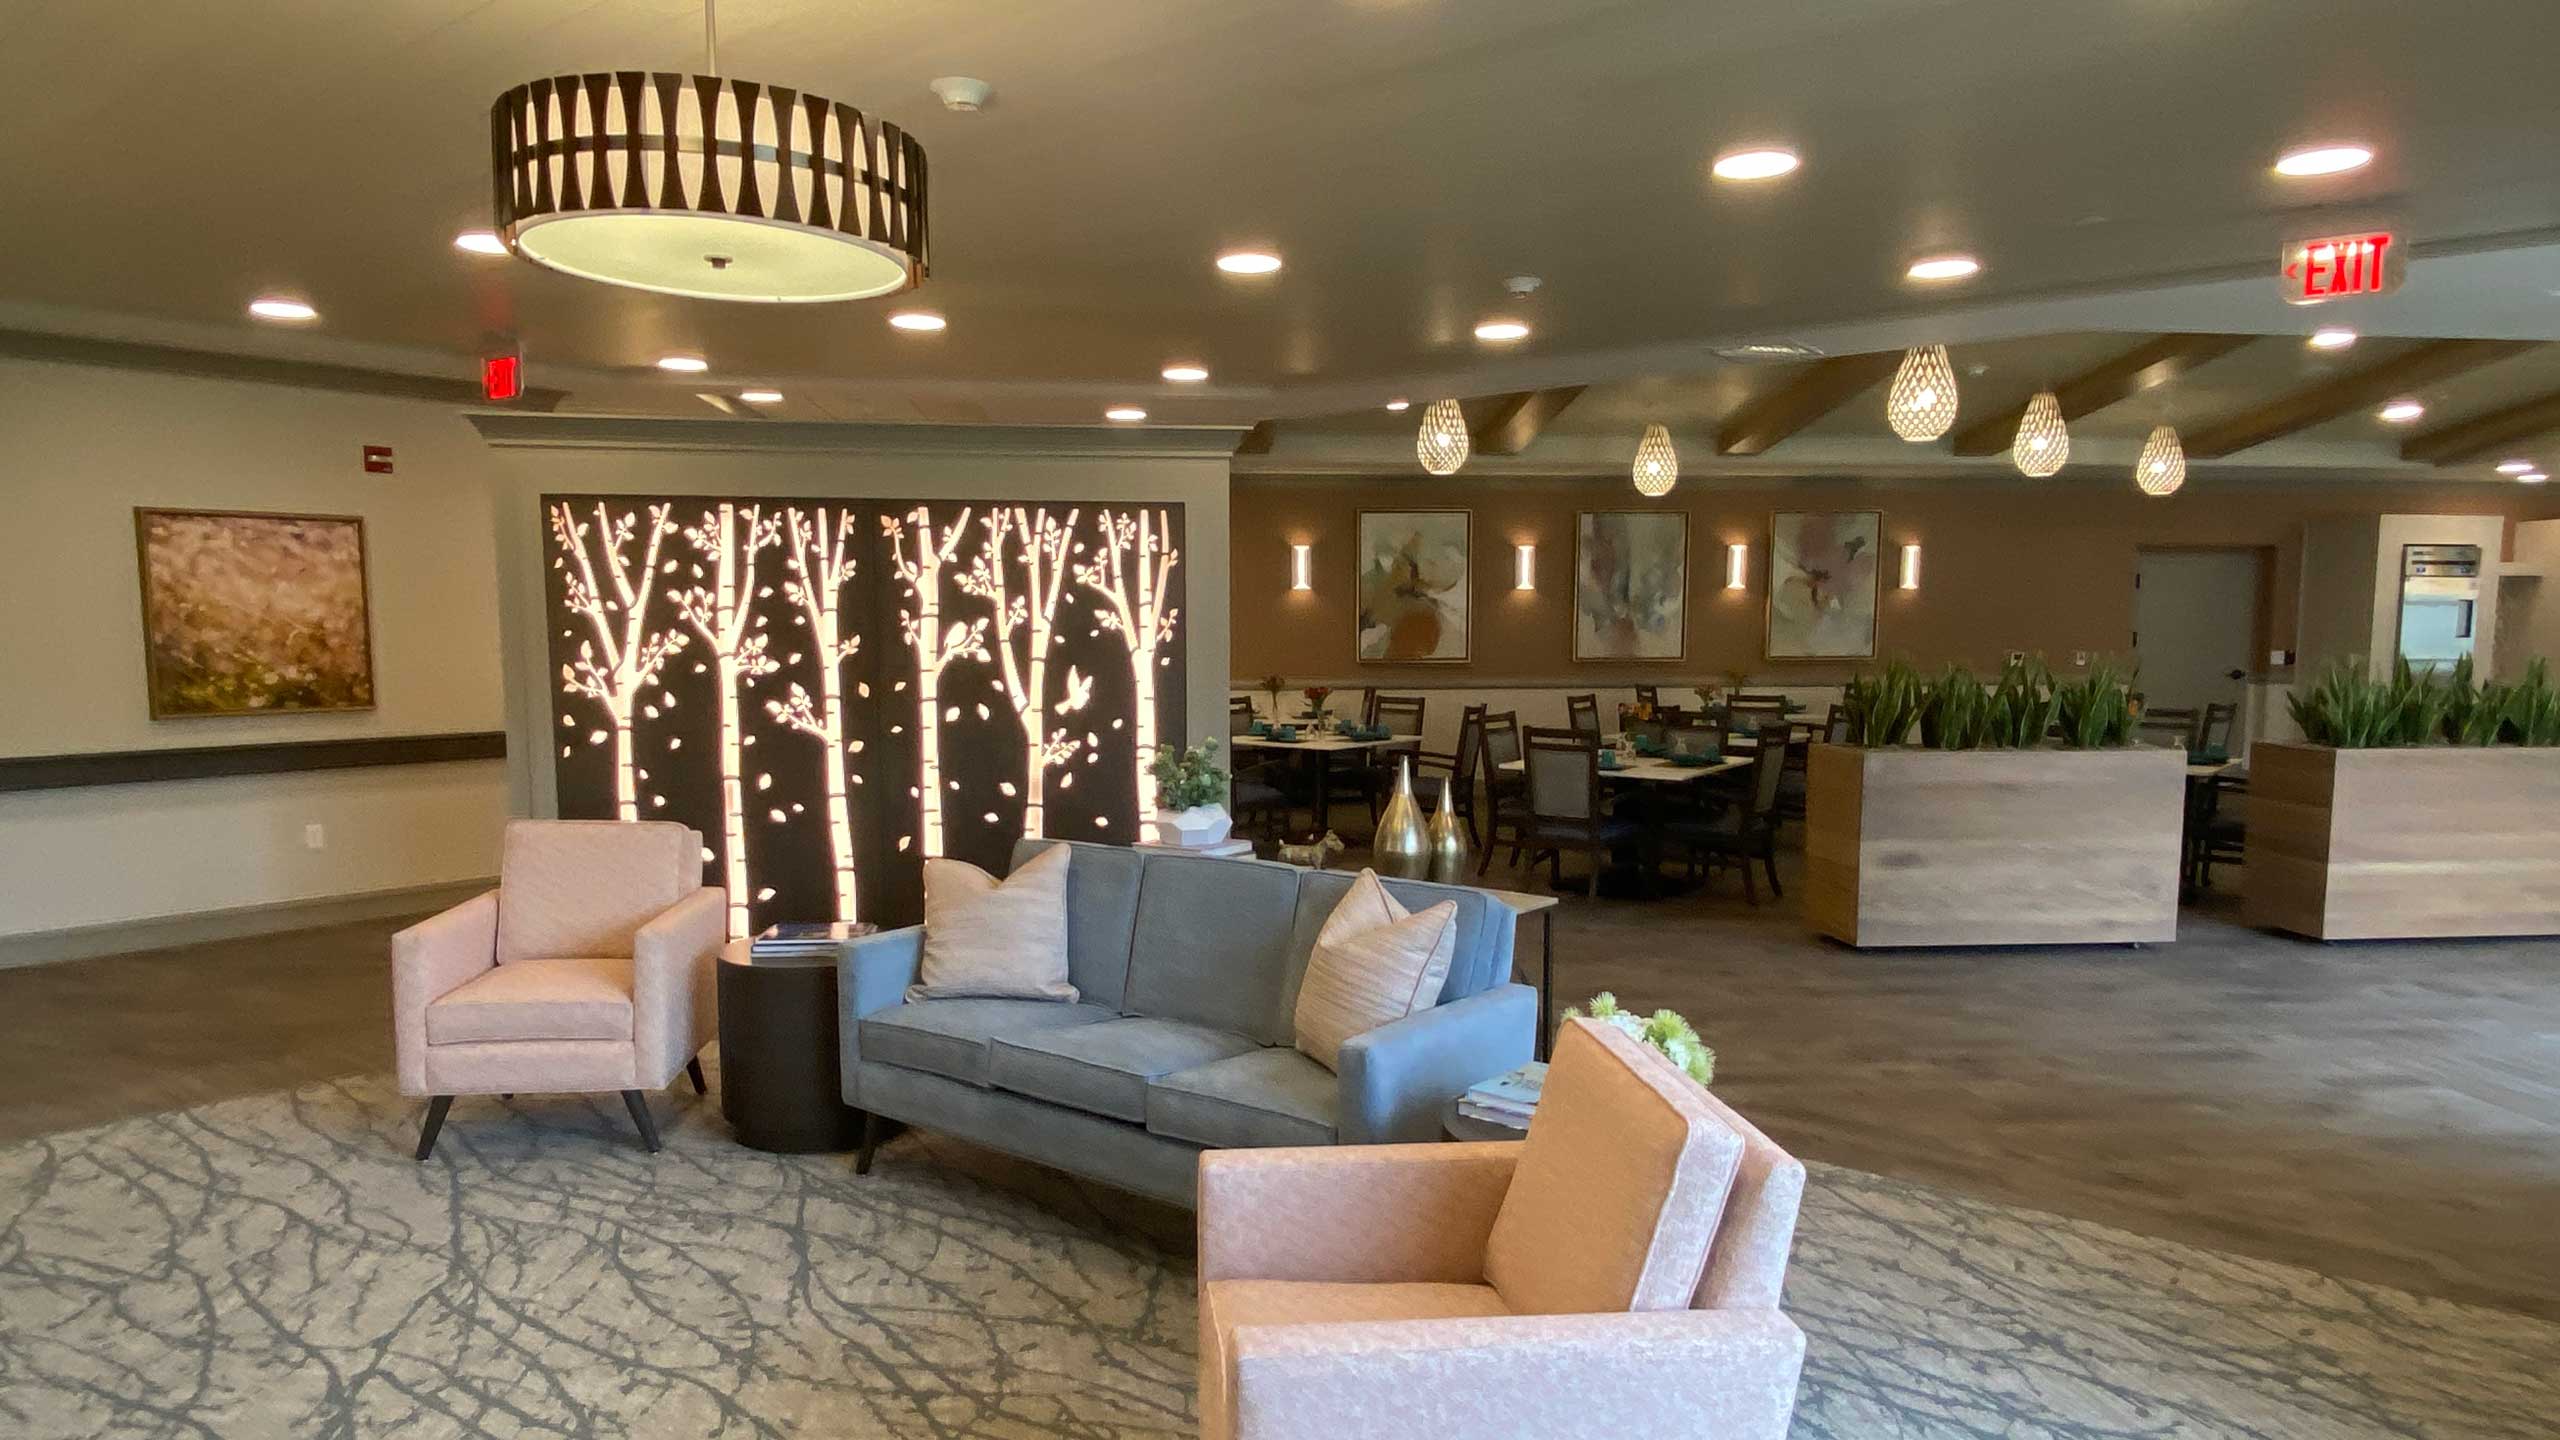 The Woodlands at Canterfield Lounge and dining area